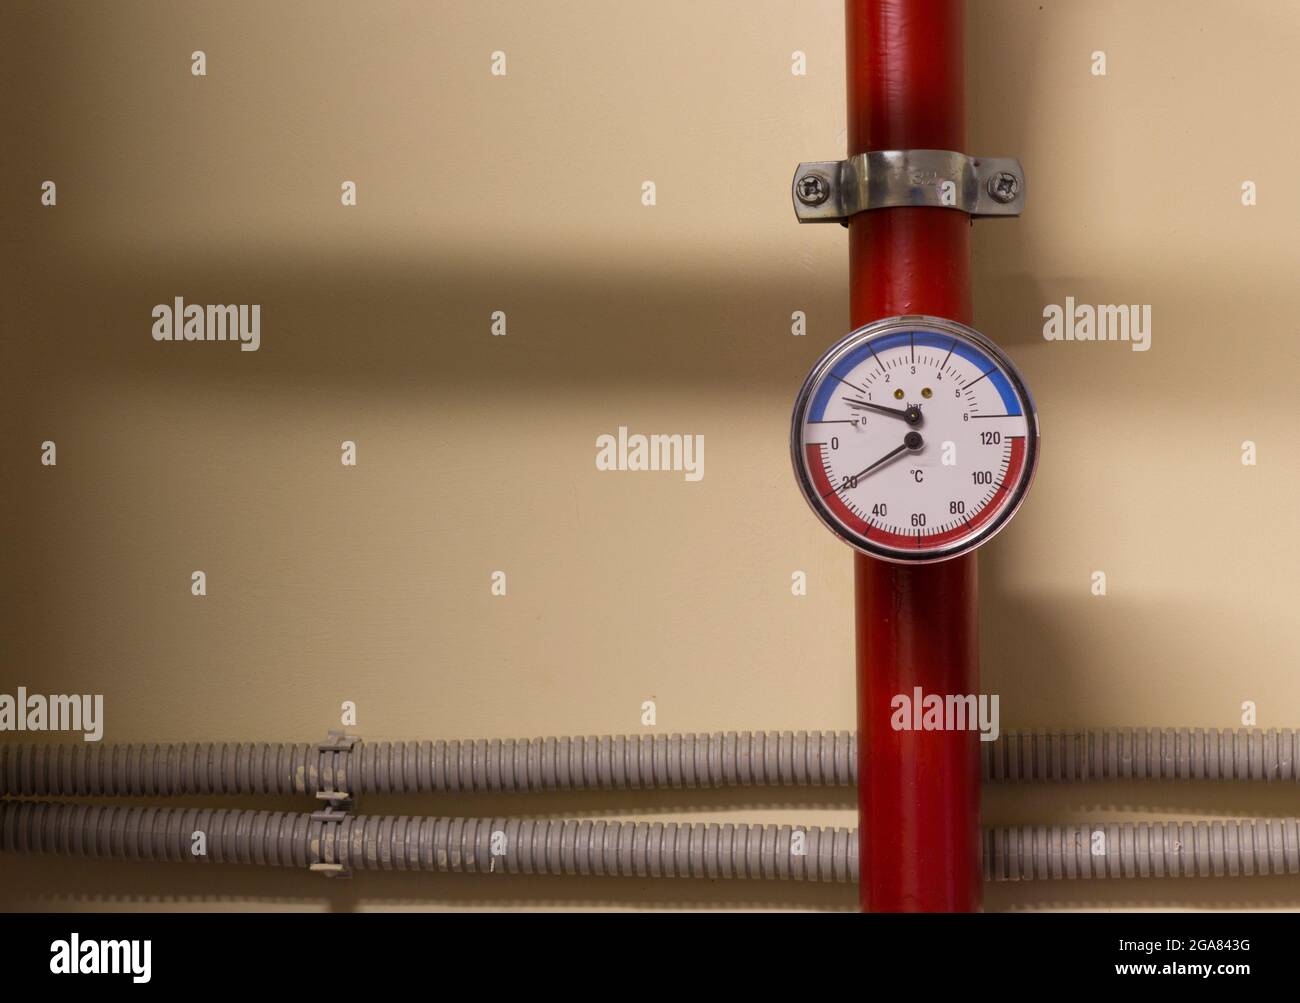 A number of identical manometers stand on plastic pipes with red valves Stock Photo